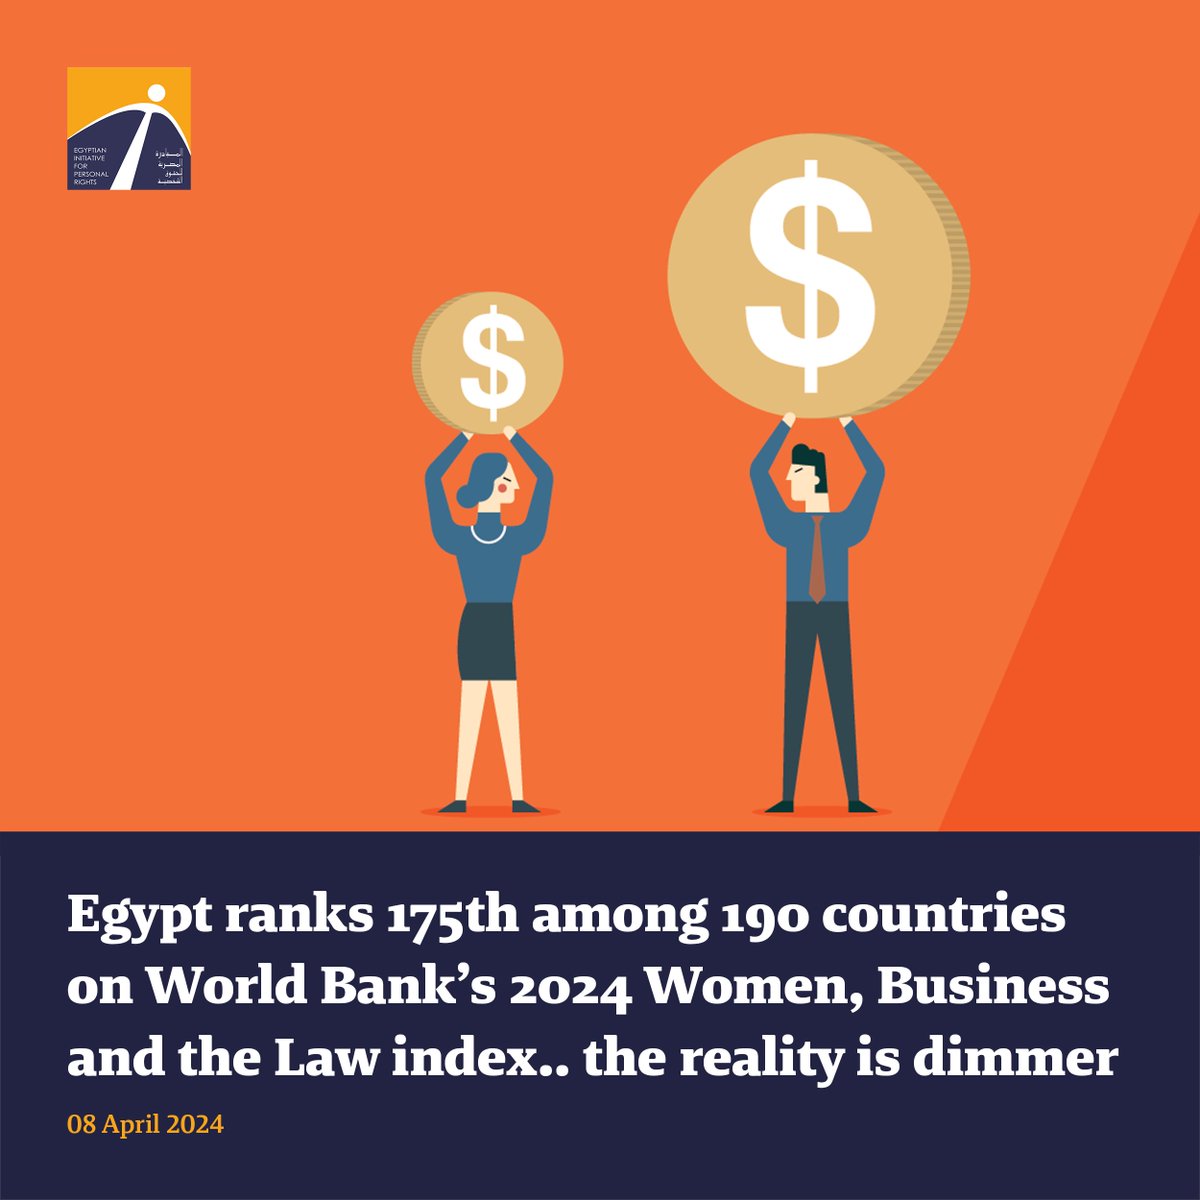 🟧 The World Bank released its annual report titled “Women, Business and the Law” (WBL) to track the barriers women face in joining the global workforce and economies. Egypt ranked 175th on the list of 190 countries. 👉 Read the full statement: tinyurl.com/vrp76mbm